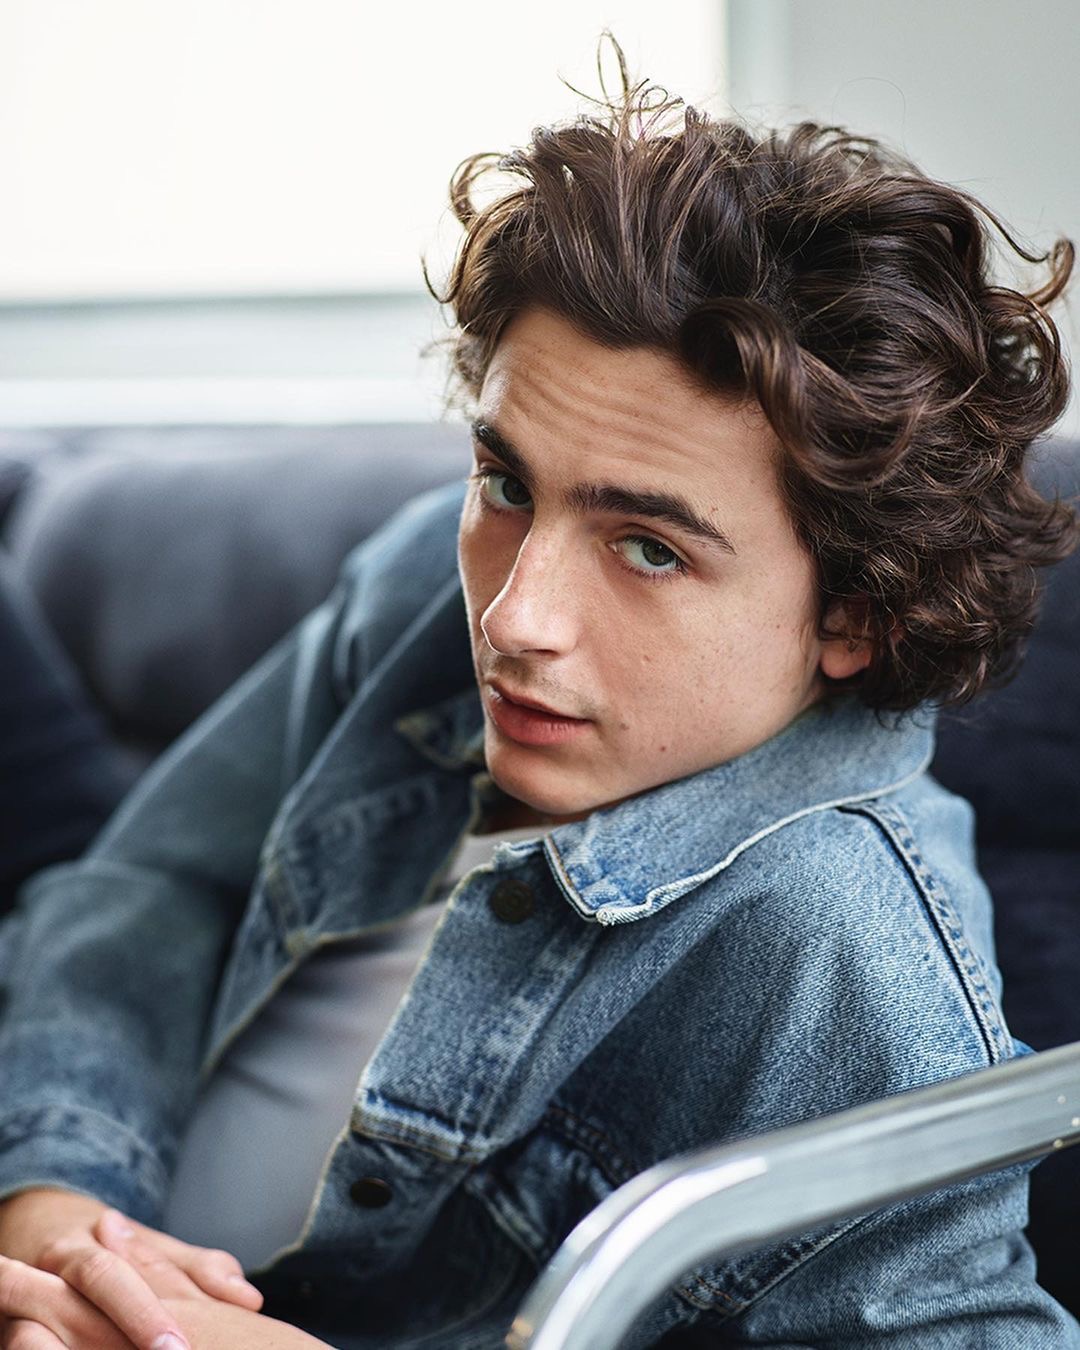 20 Facts About Timothe Chalamet Every Fan Should Know 